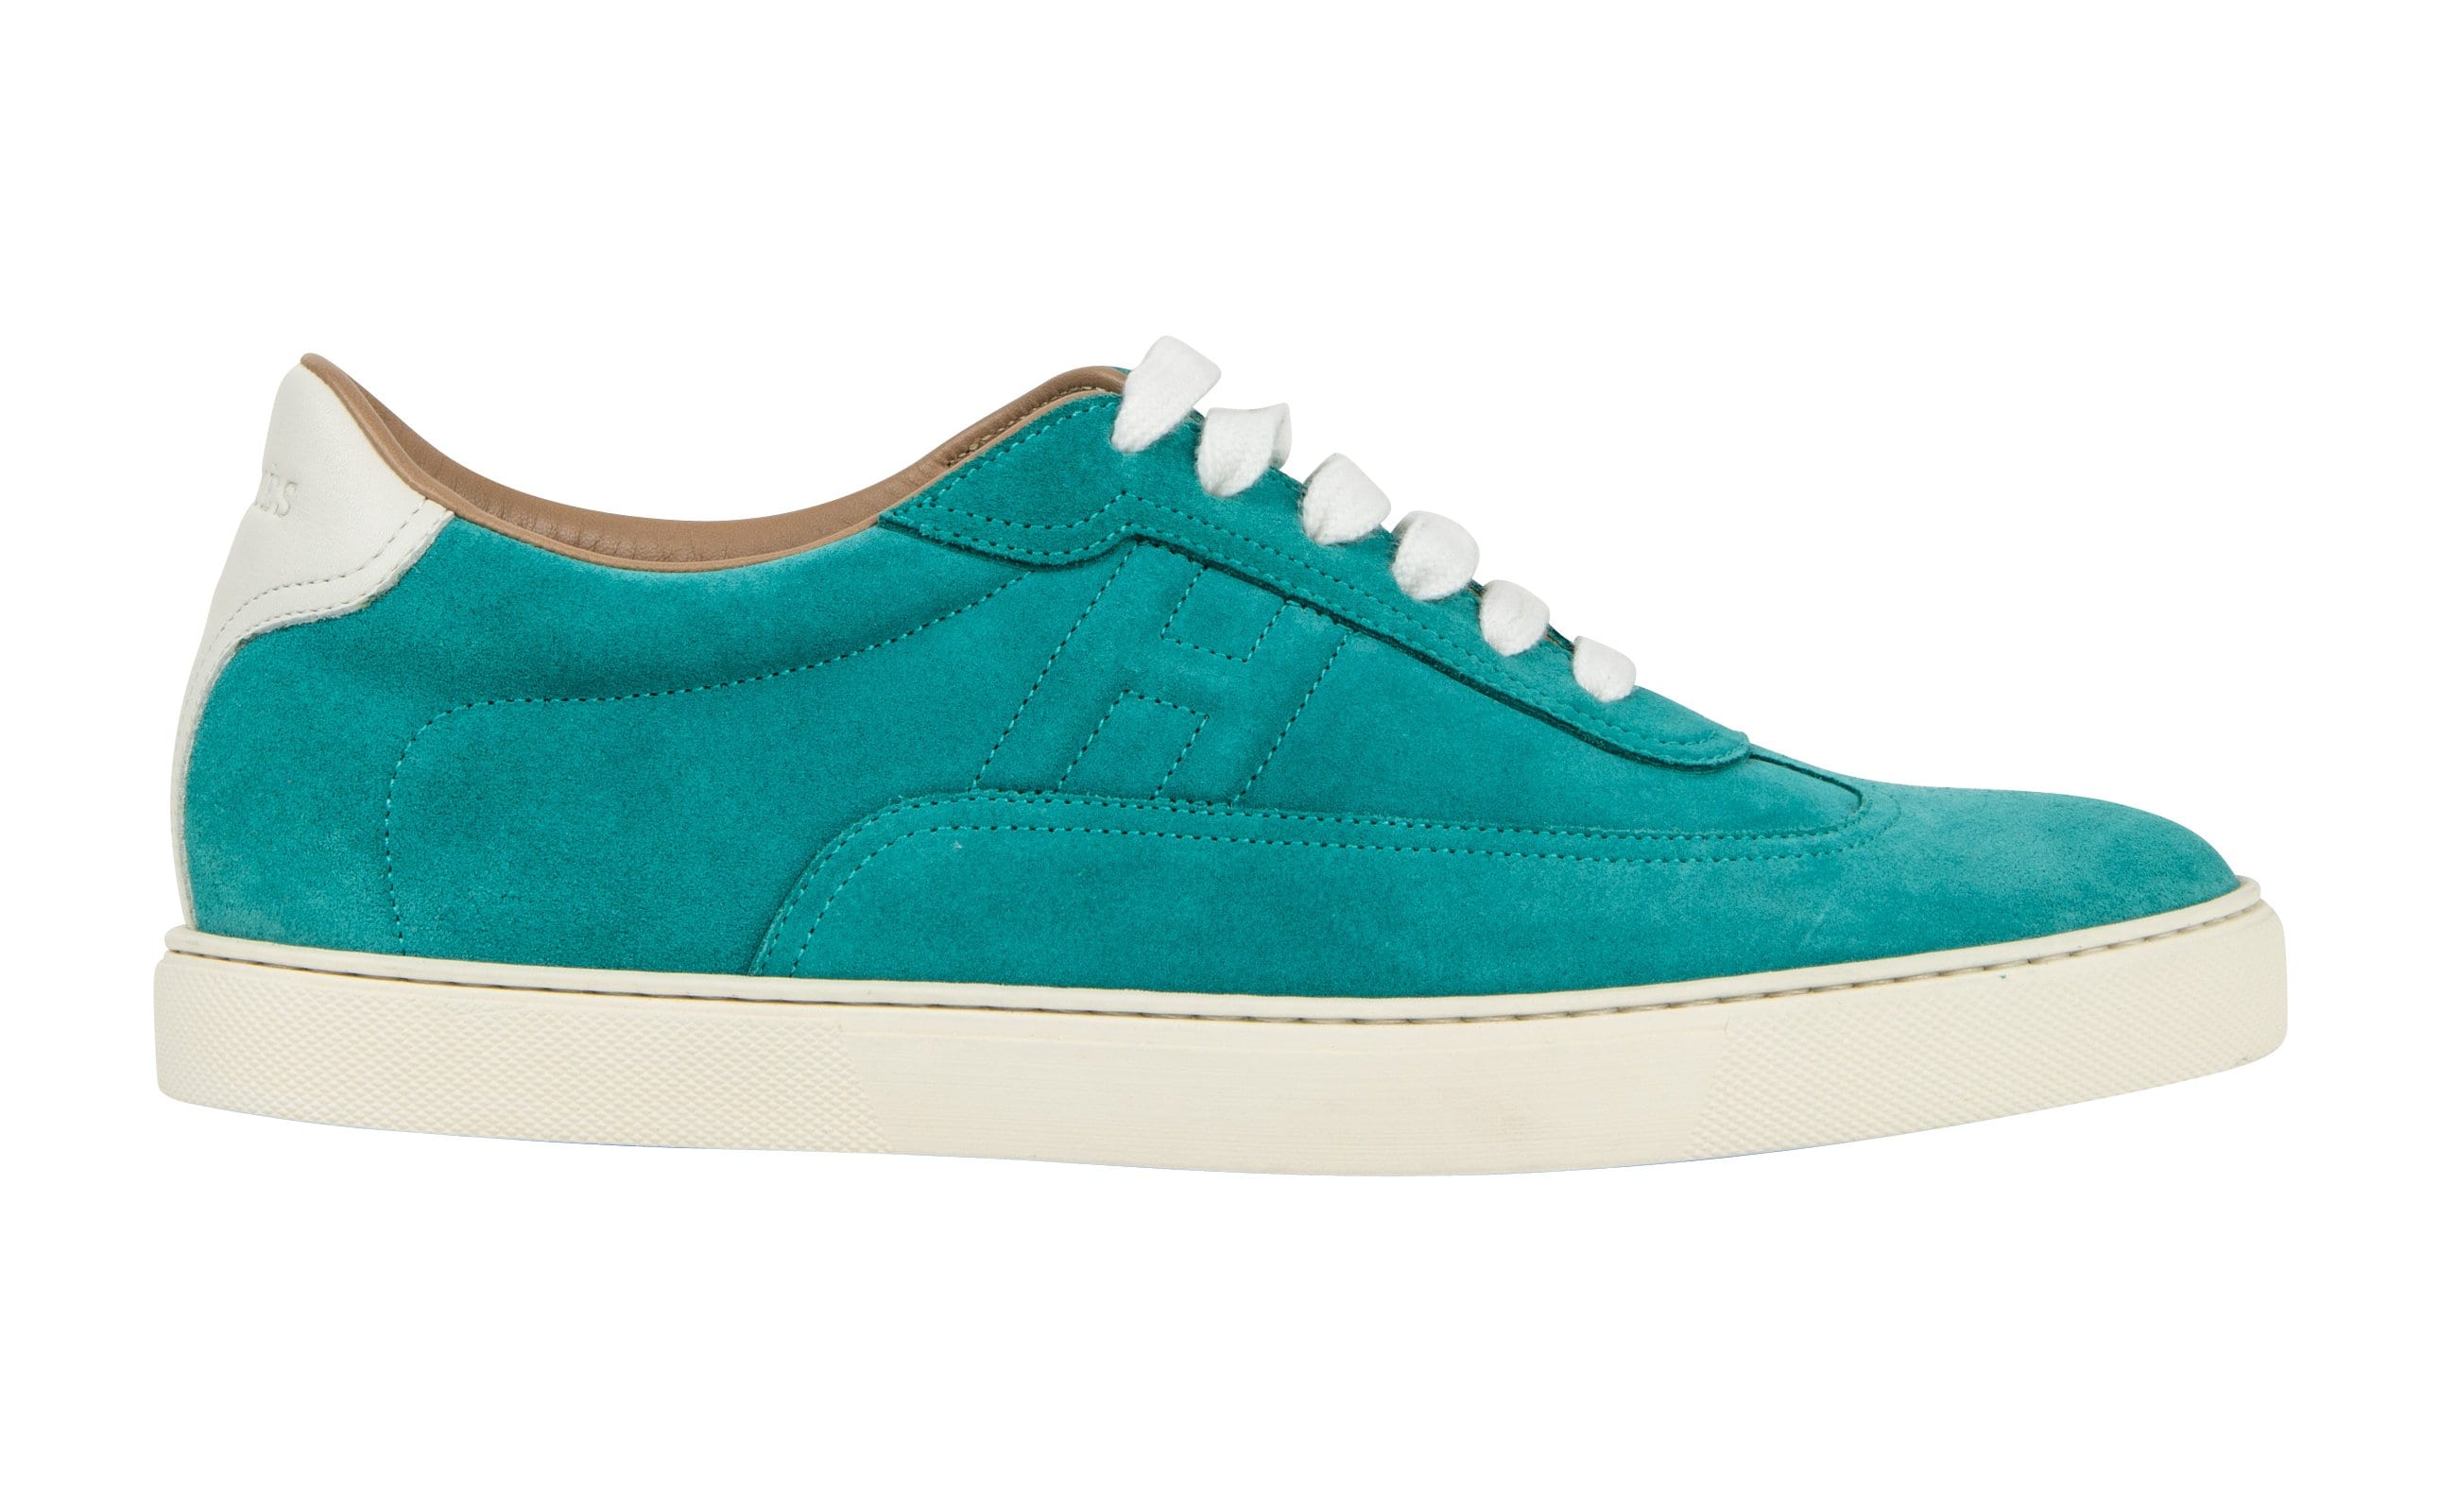 Men's blue suede leather low Sneakers